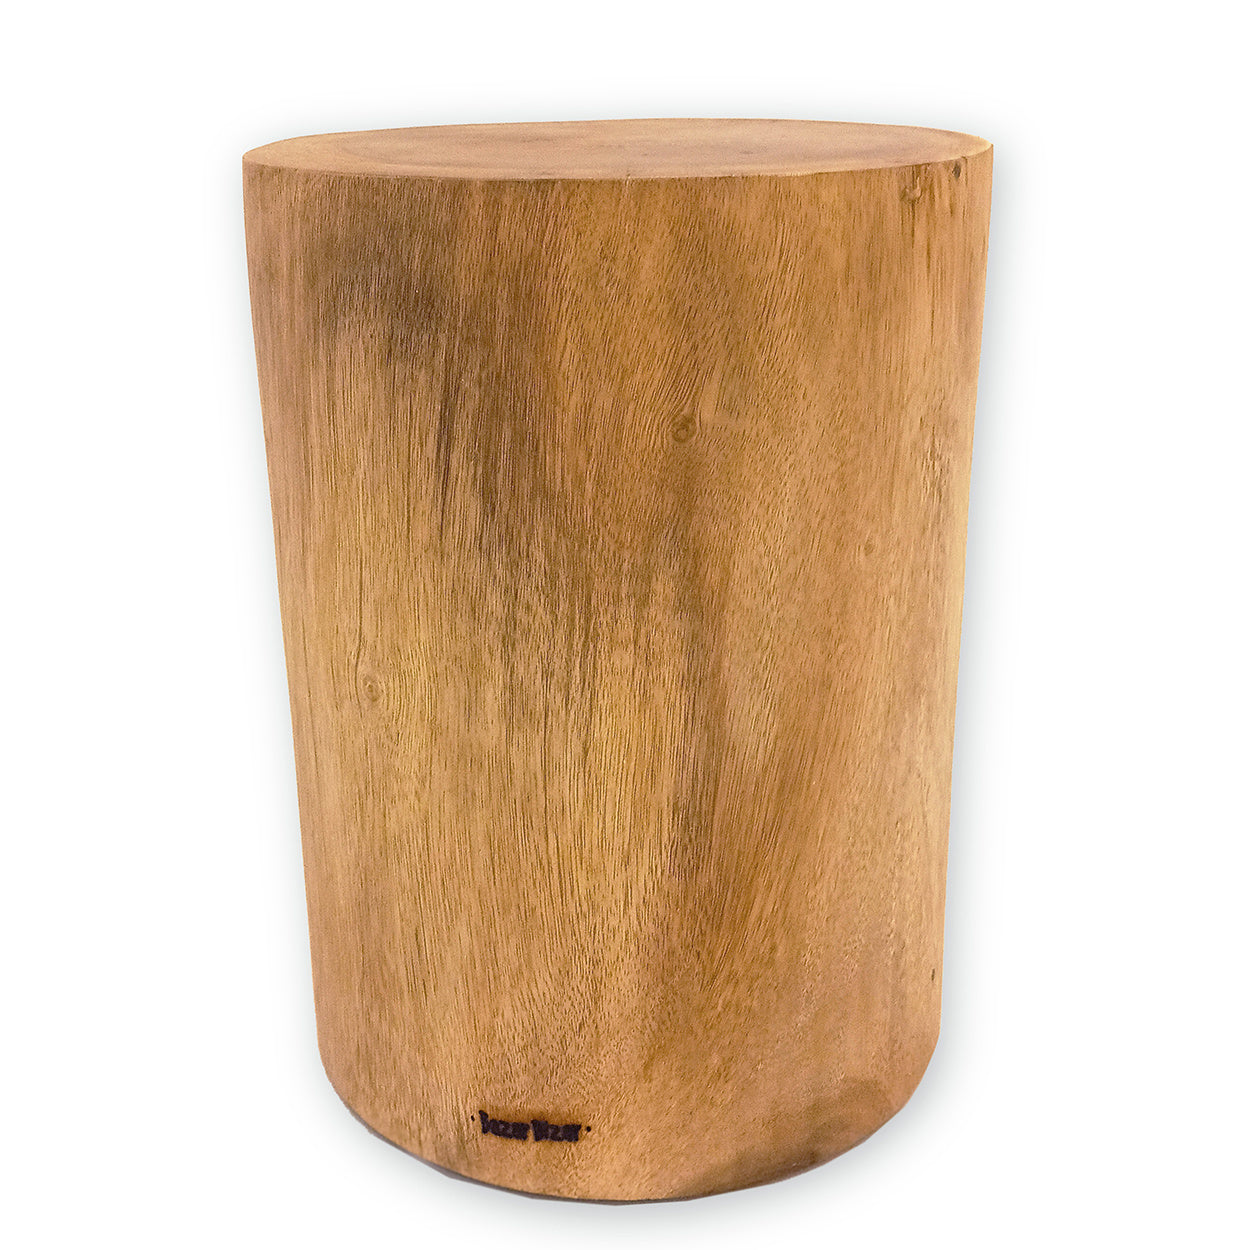 THE TRIBE Stool Natural